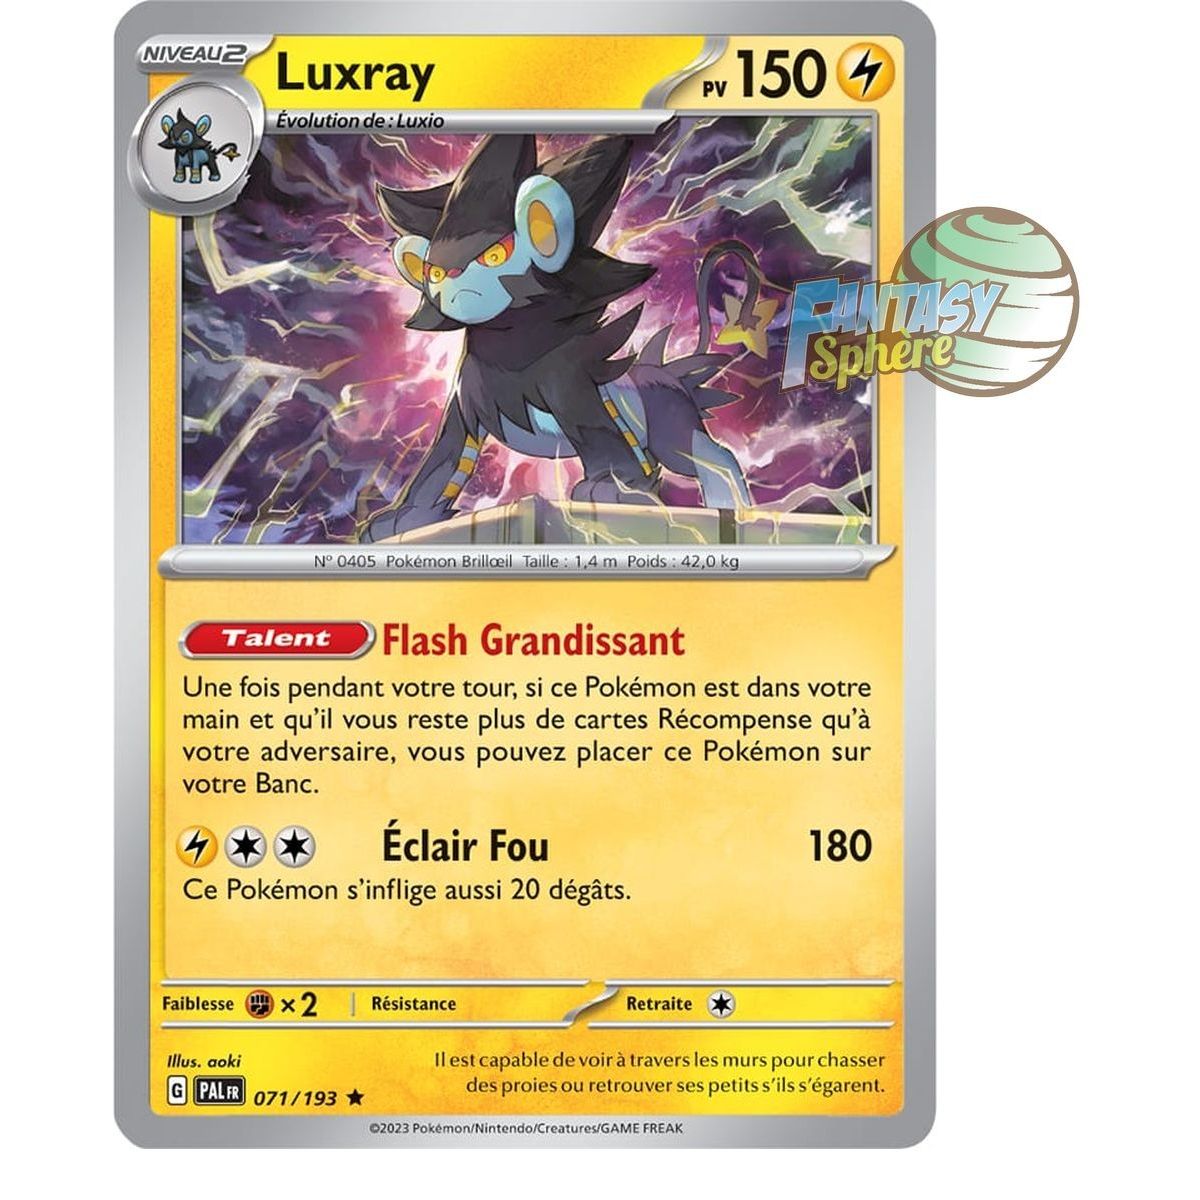 Luxray - Reverse 71/193 - Scarlet and Violet Evolution in Paldea